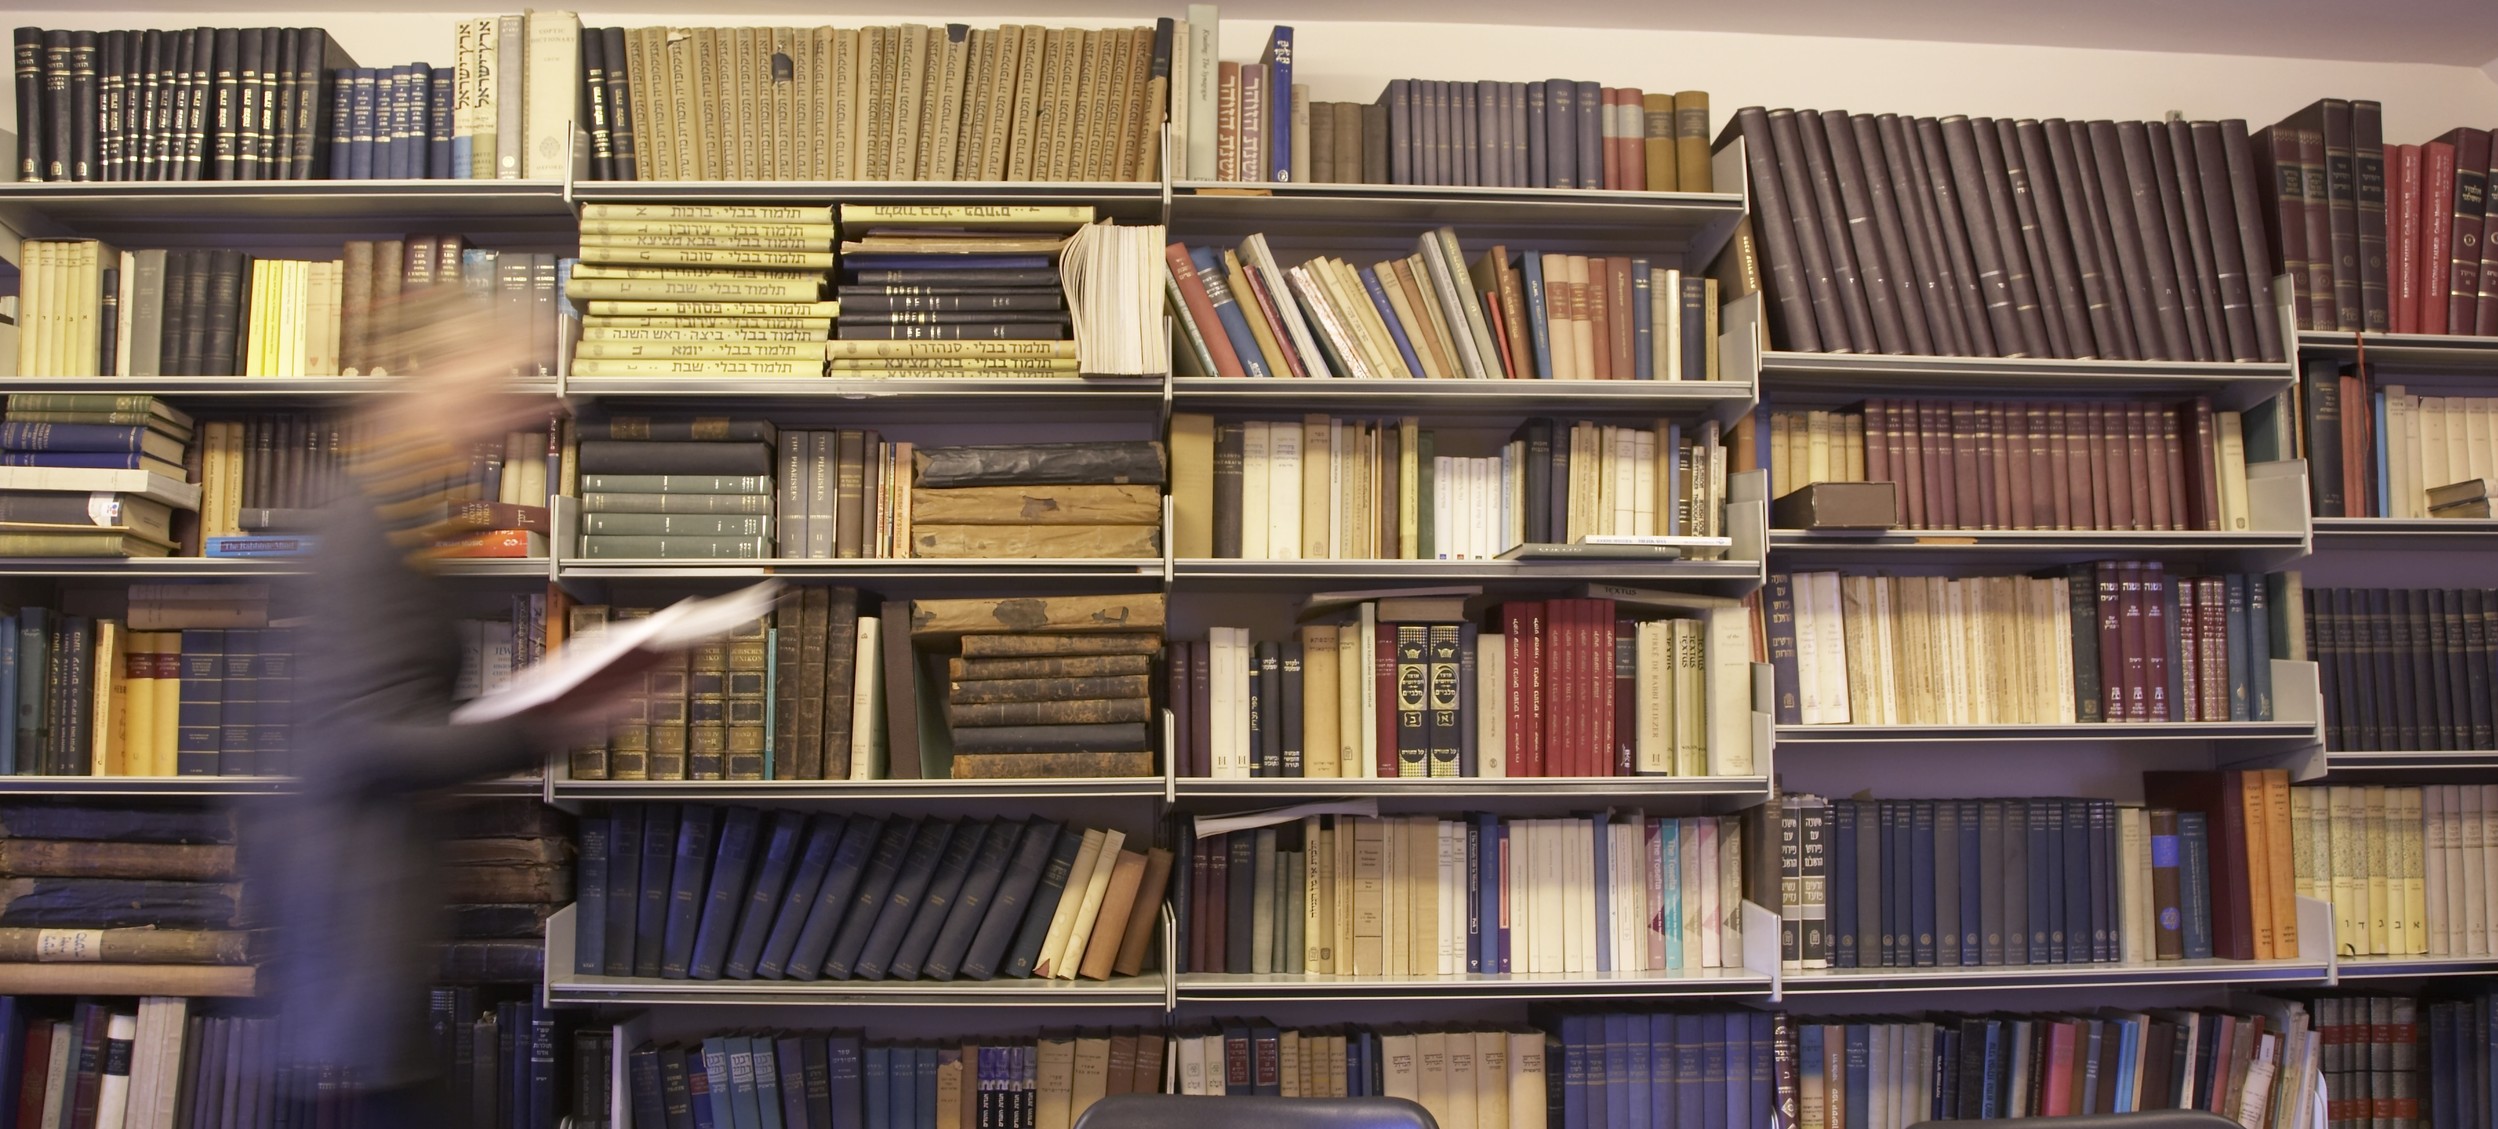 Shelves of books from theology and religion